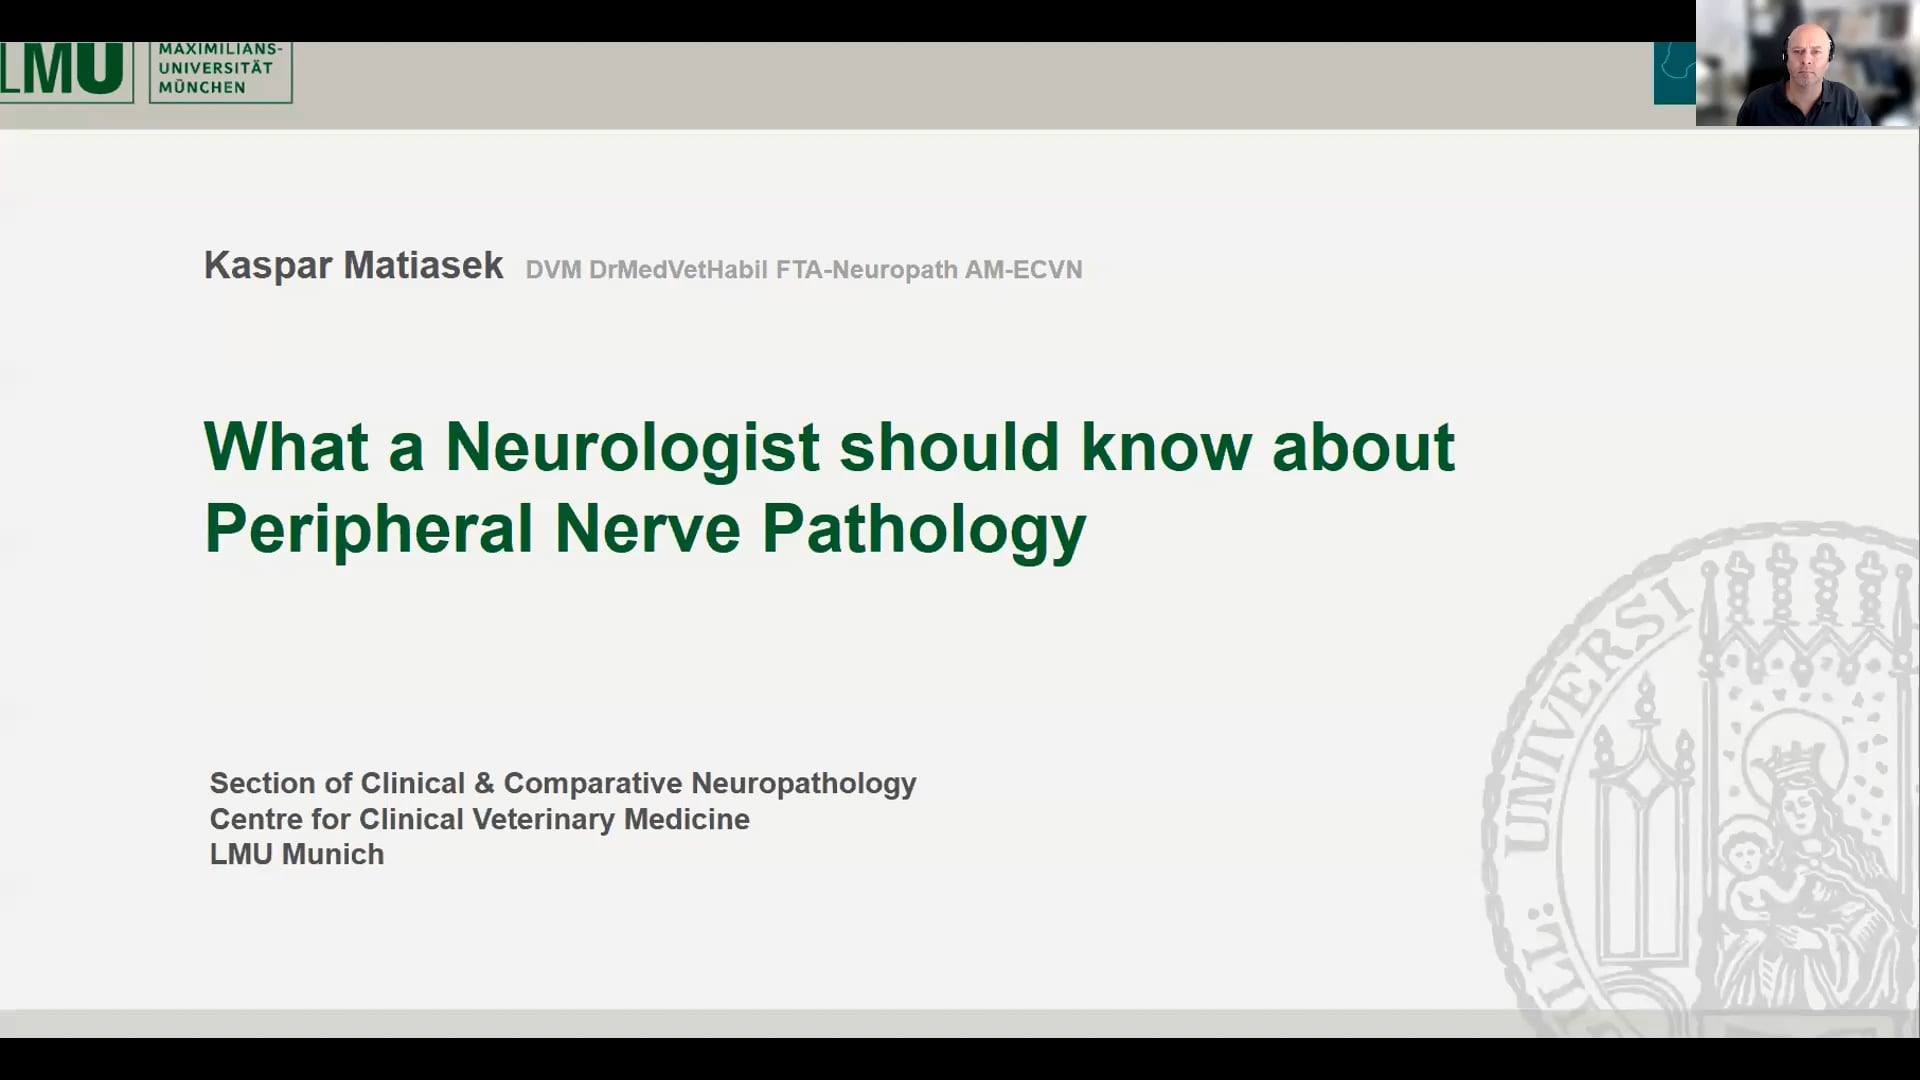 What a neurologist should know about peripheral nerve pathology